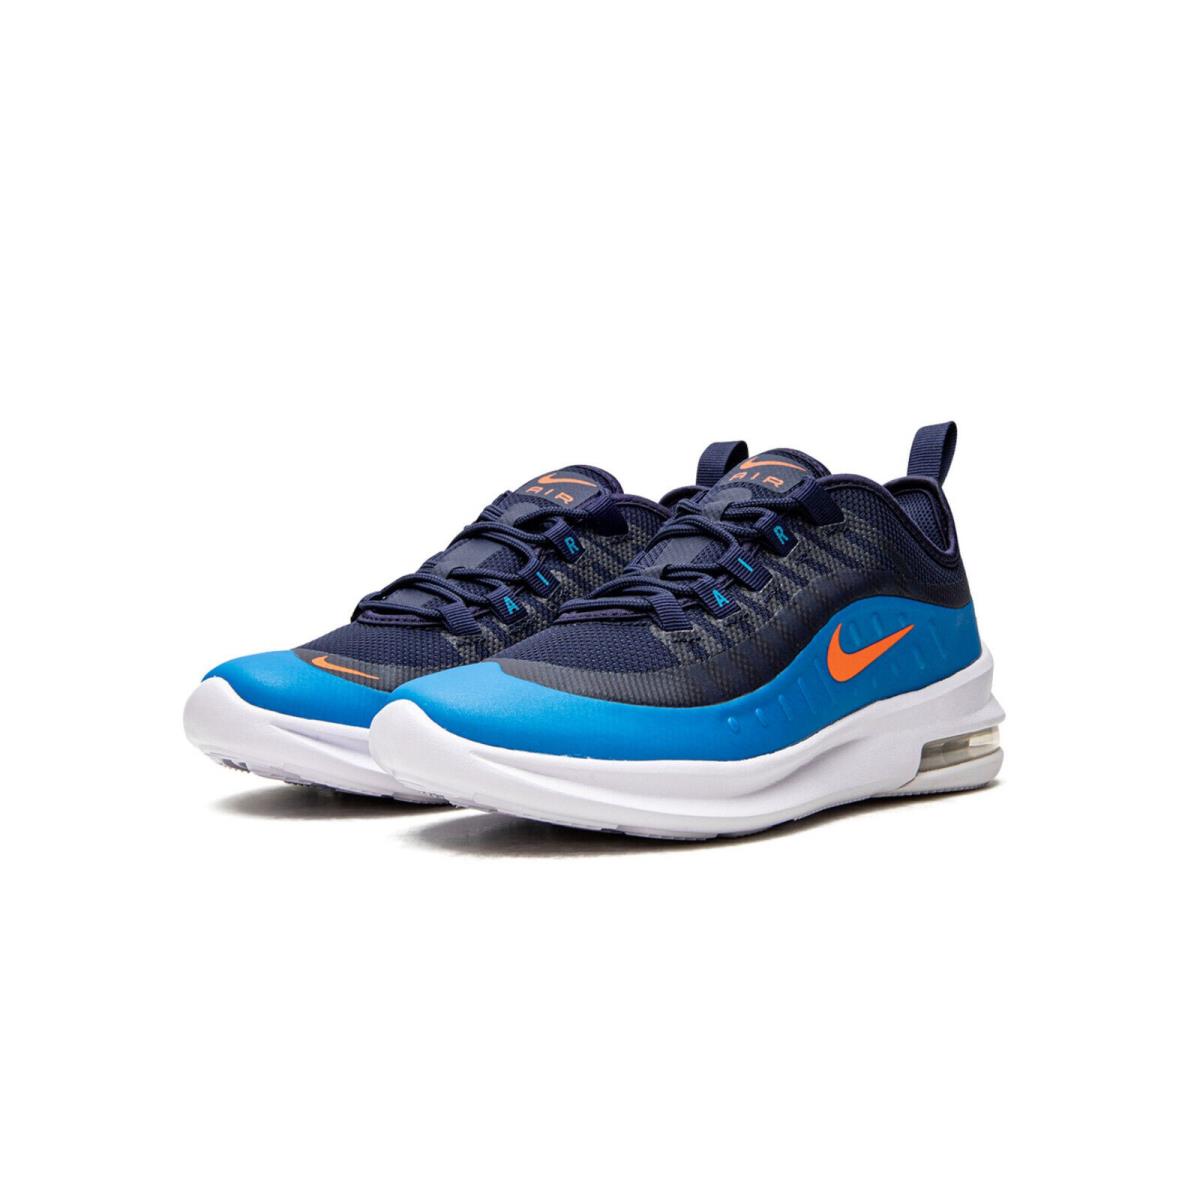 Nike Air Max Axis Navy Blue Running Shoes AH5222 402 - Size 7Y / 8.5 Womens - Multicolor